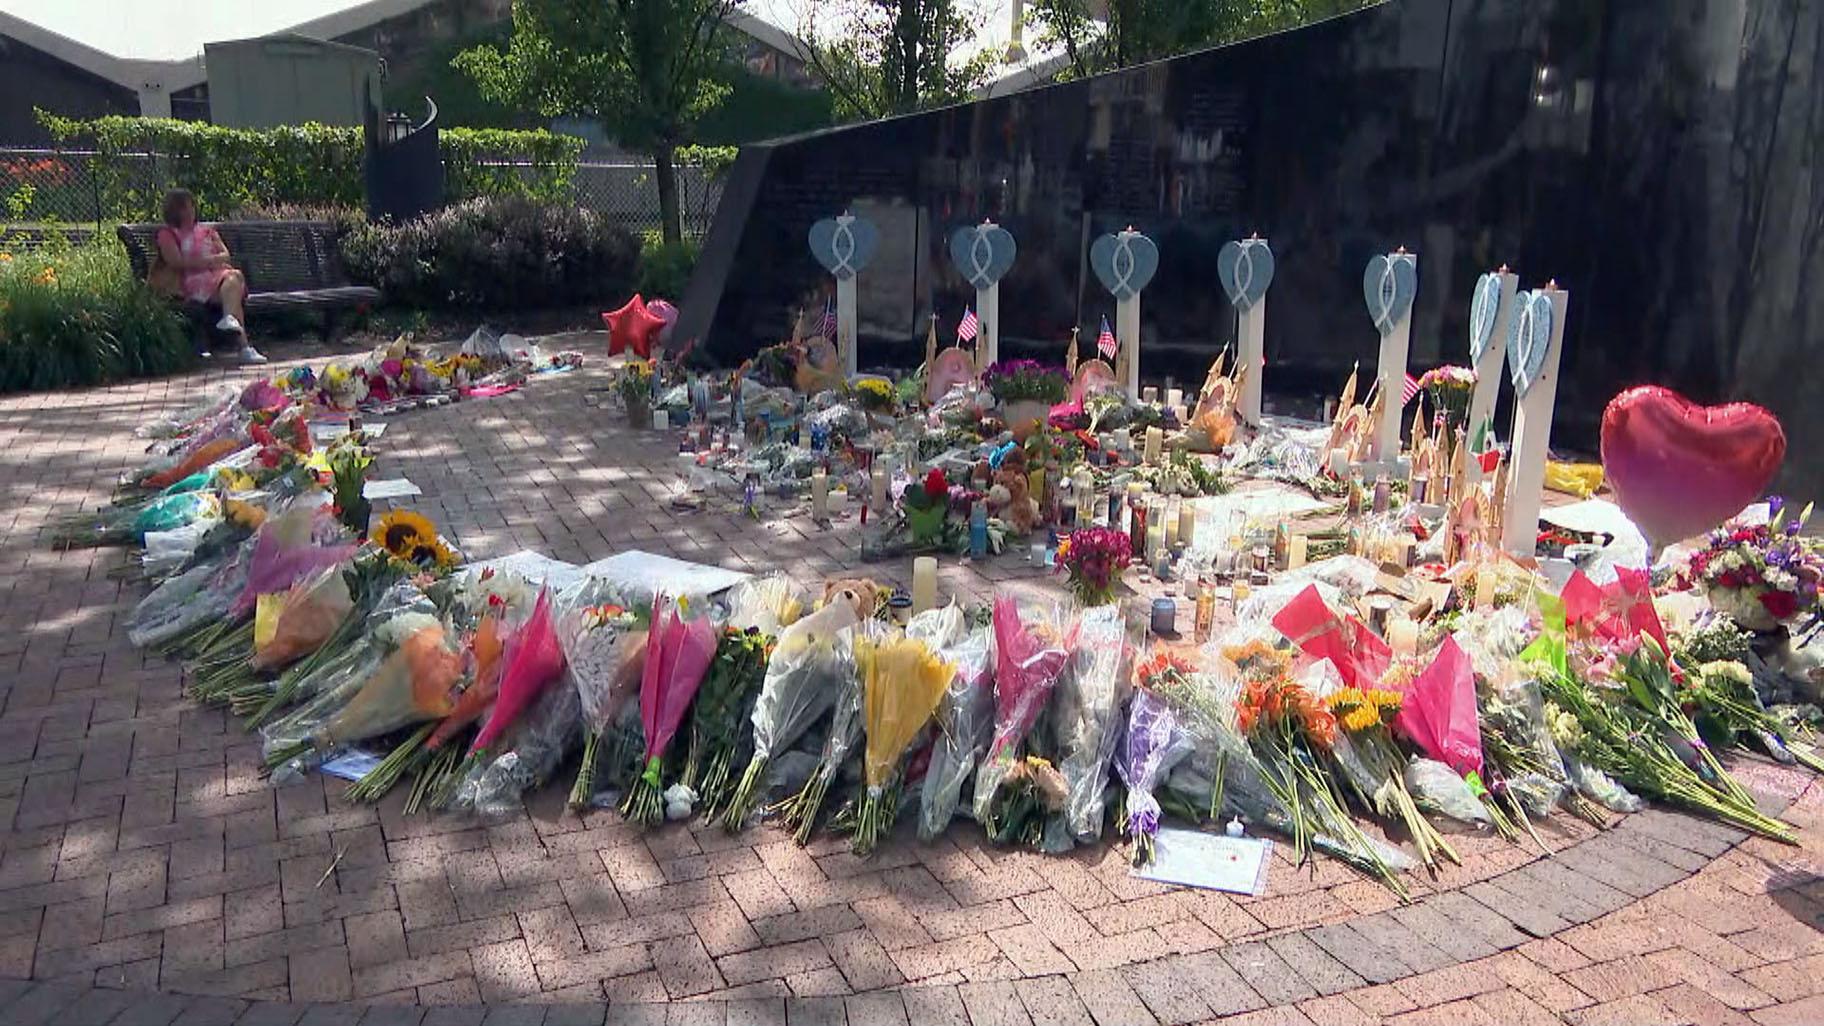 A memorial to the victims of the Highland Park shooting is pictured in July 2022. (WTTW News)